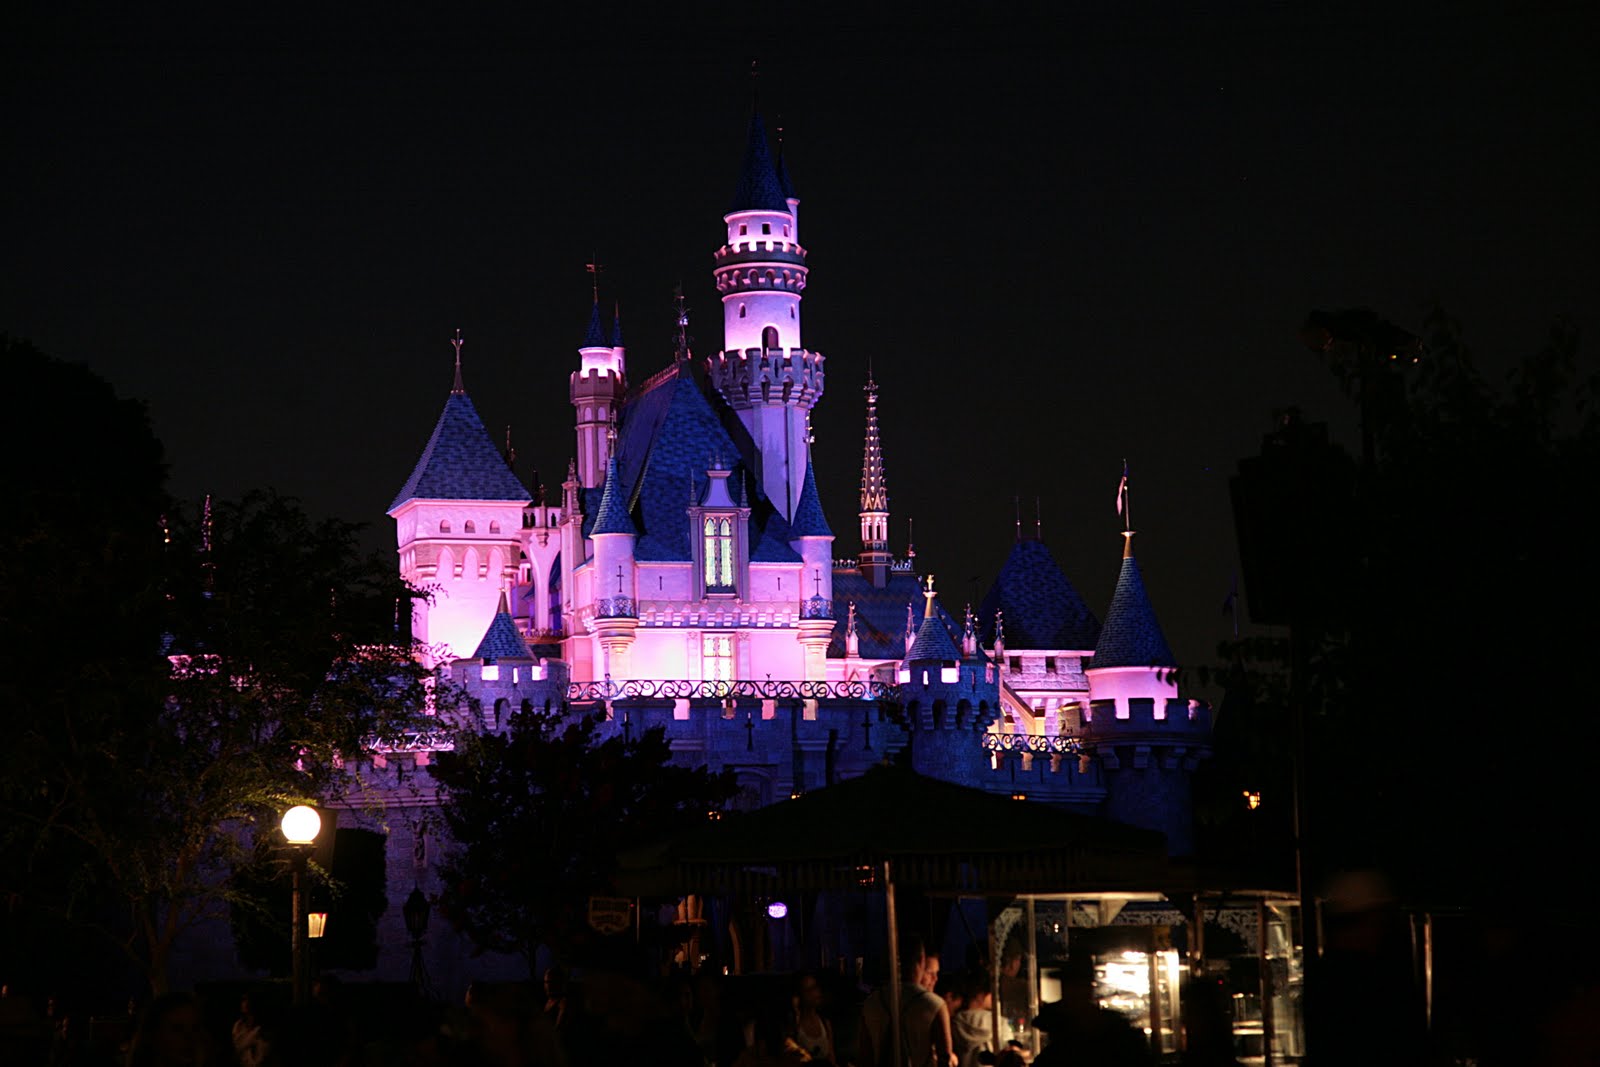 The Best Places: The DisneyLand